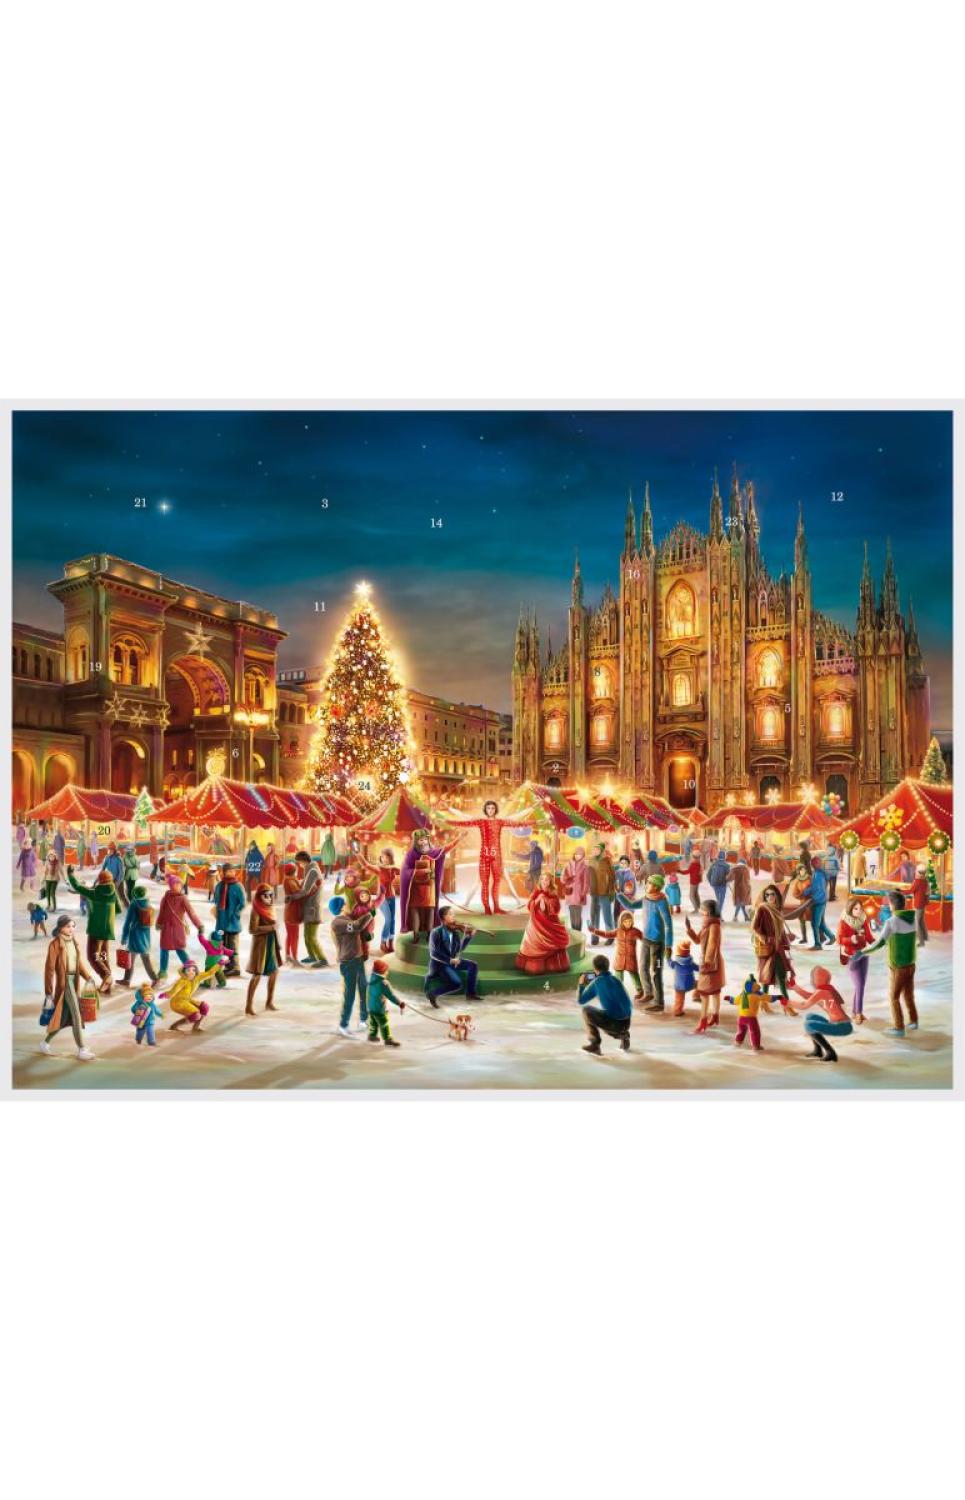 Sellmer Advent - Mailand Market Square (Large)                                                                                                                                                          